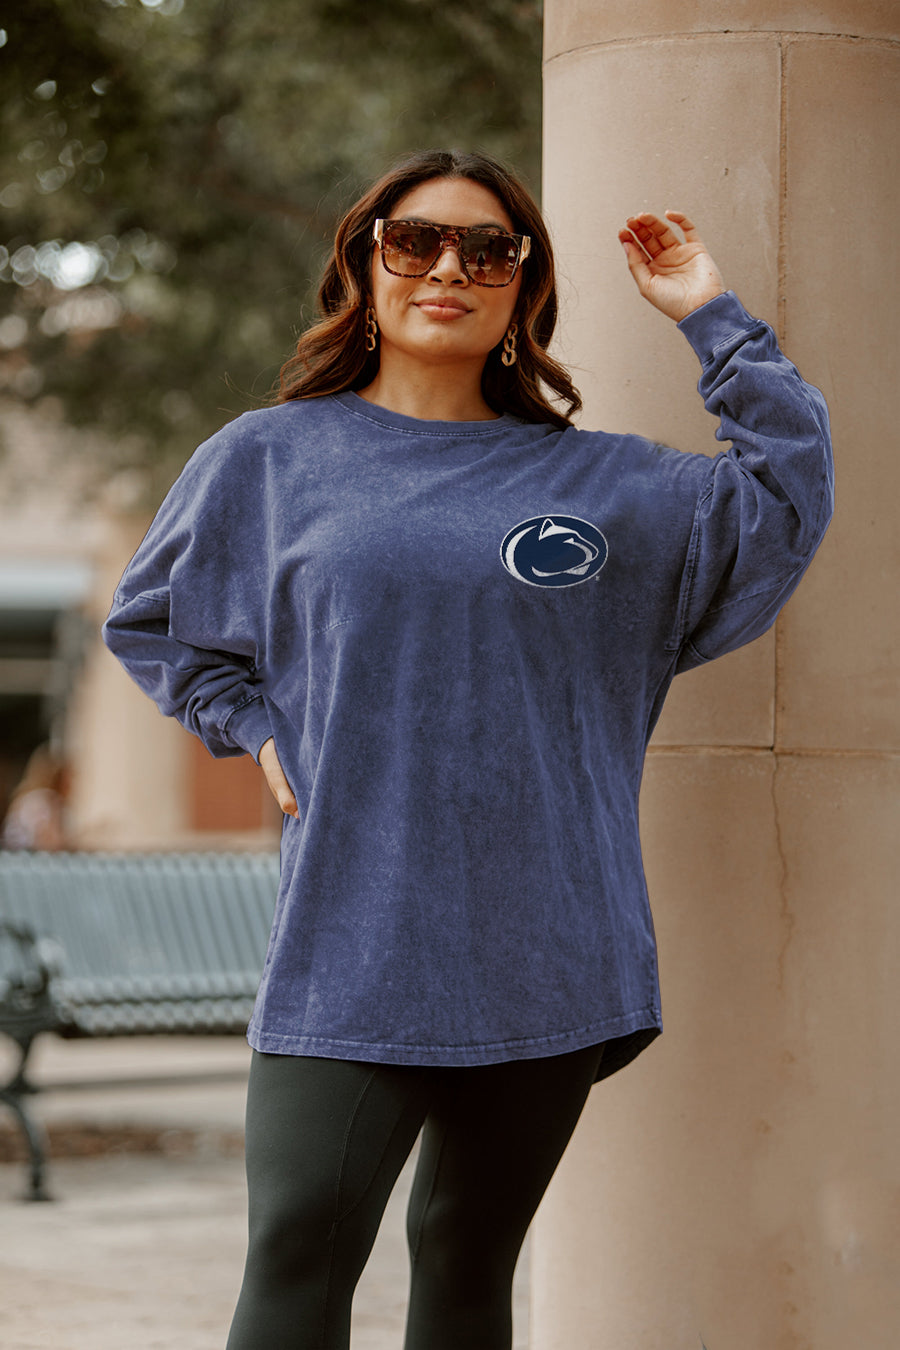 Women's Gameday Couture White Penn State Nittany Lions It's A Vibe